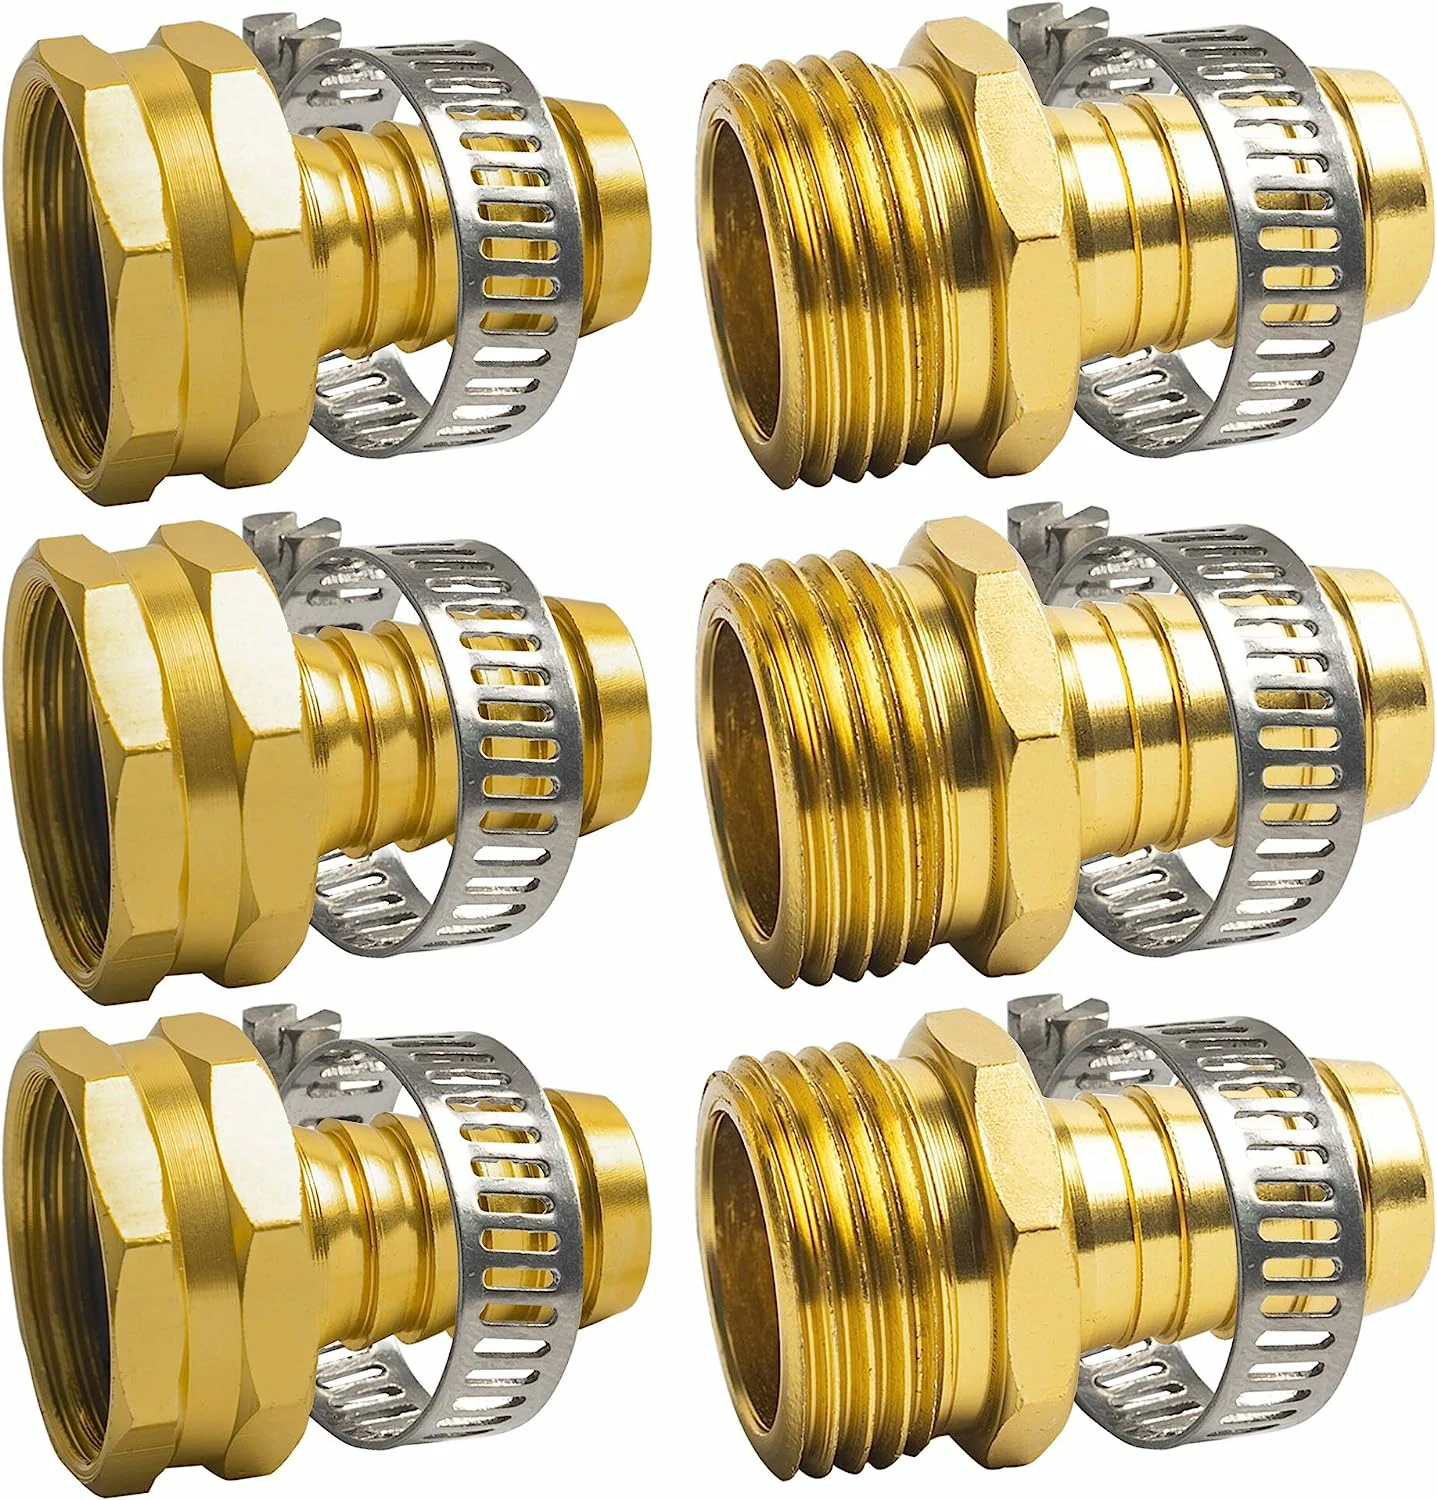 EVEAGE Hose Repair Connectors with Claps 3Pack